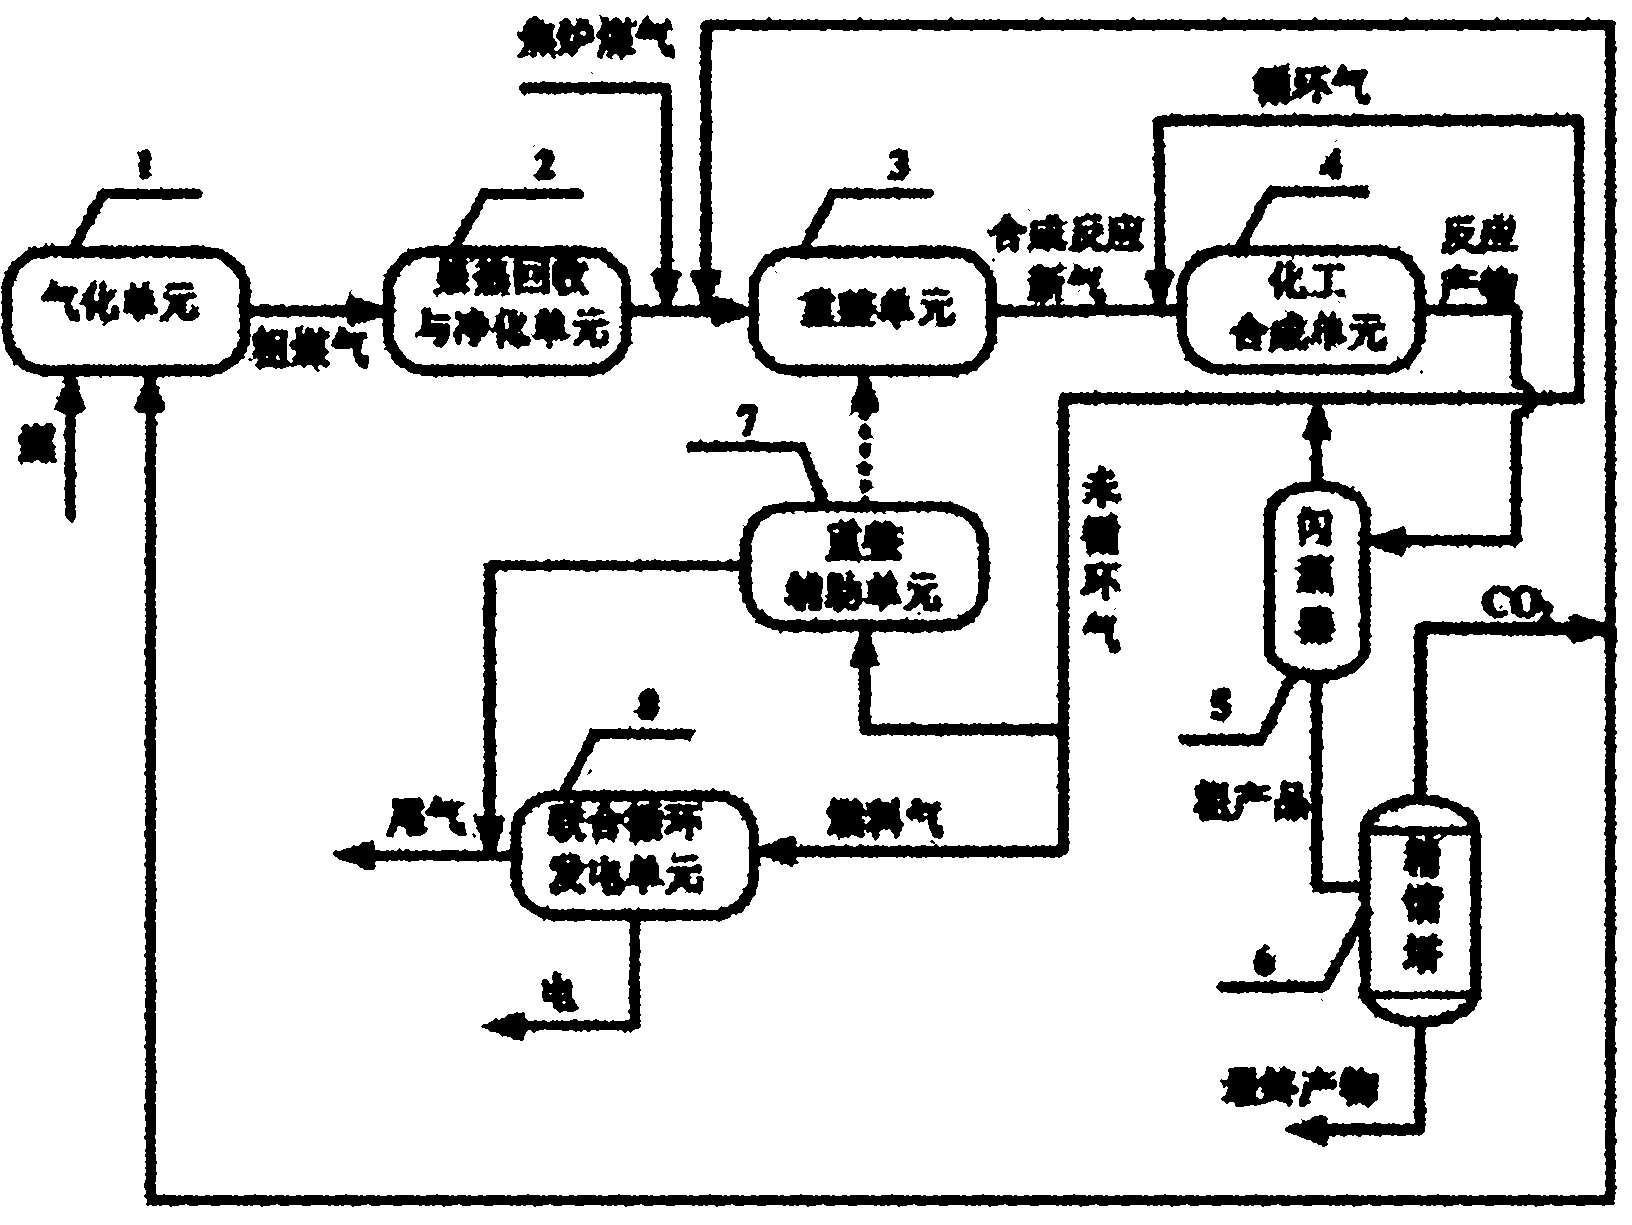 Chemical power poly-generation energy system and method for recycling CO2